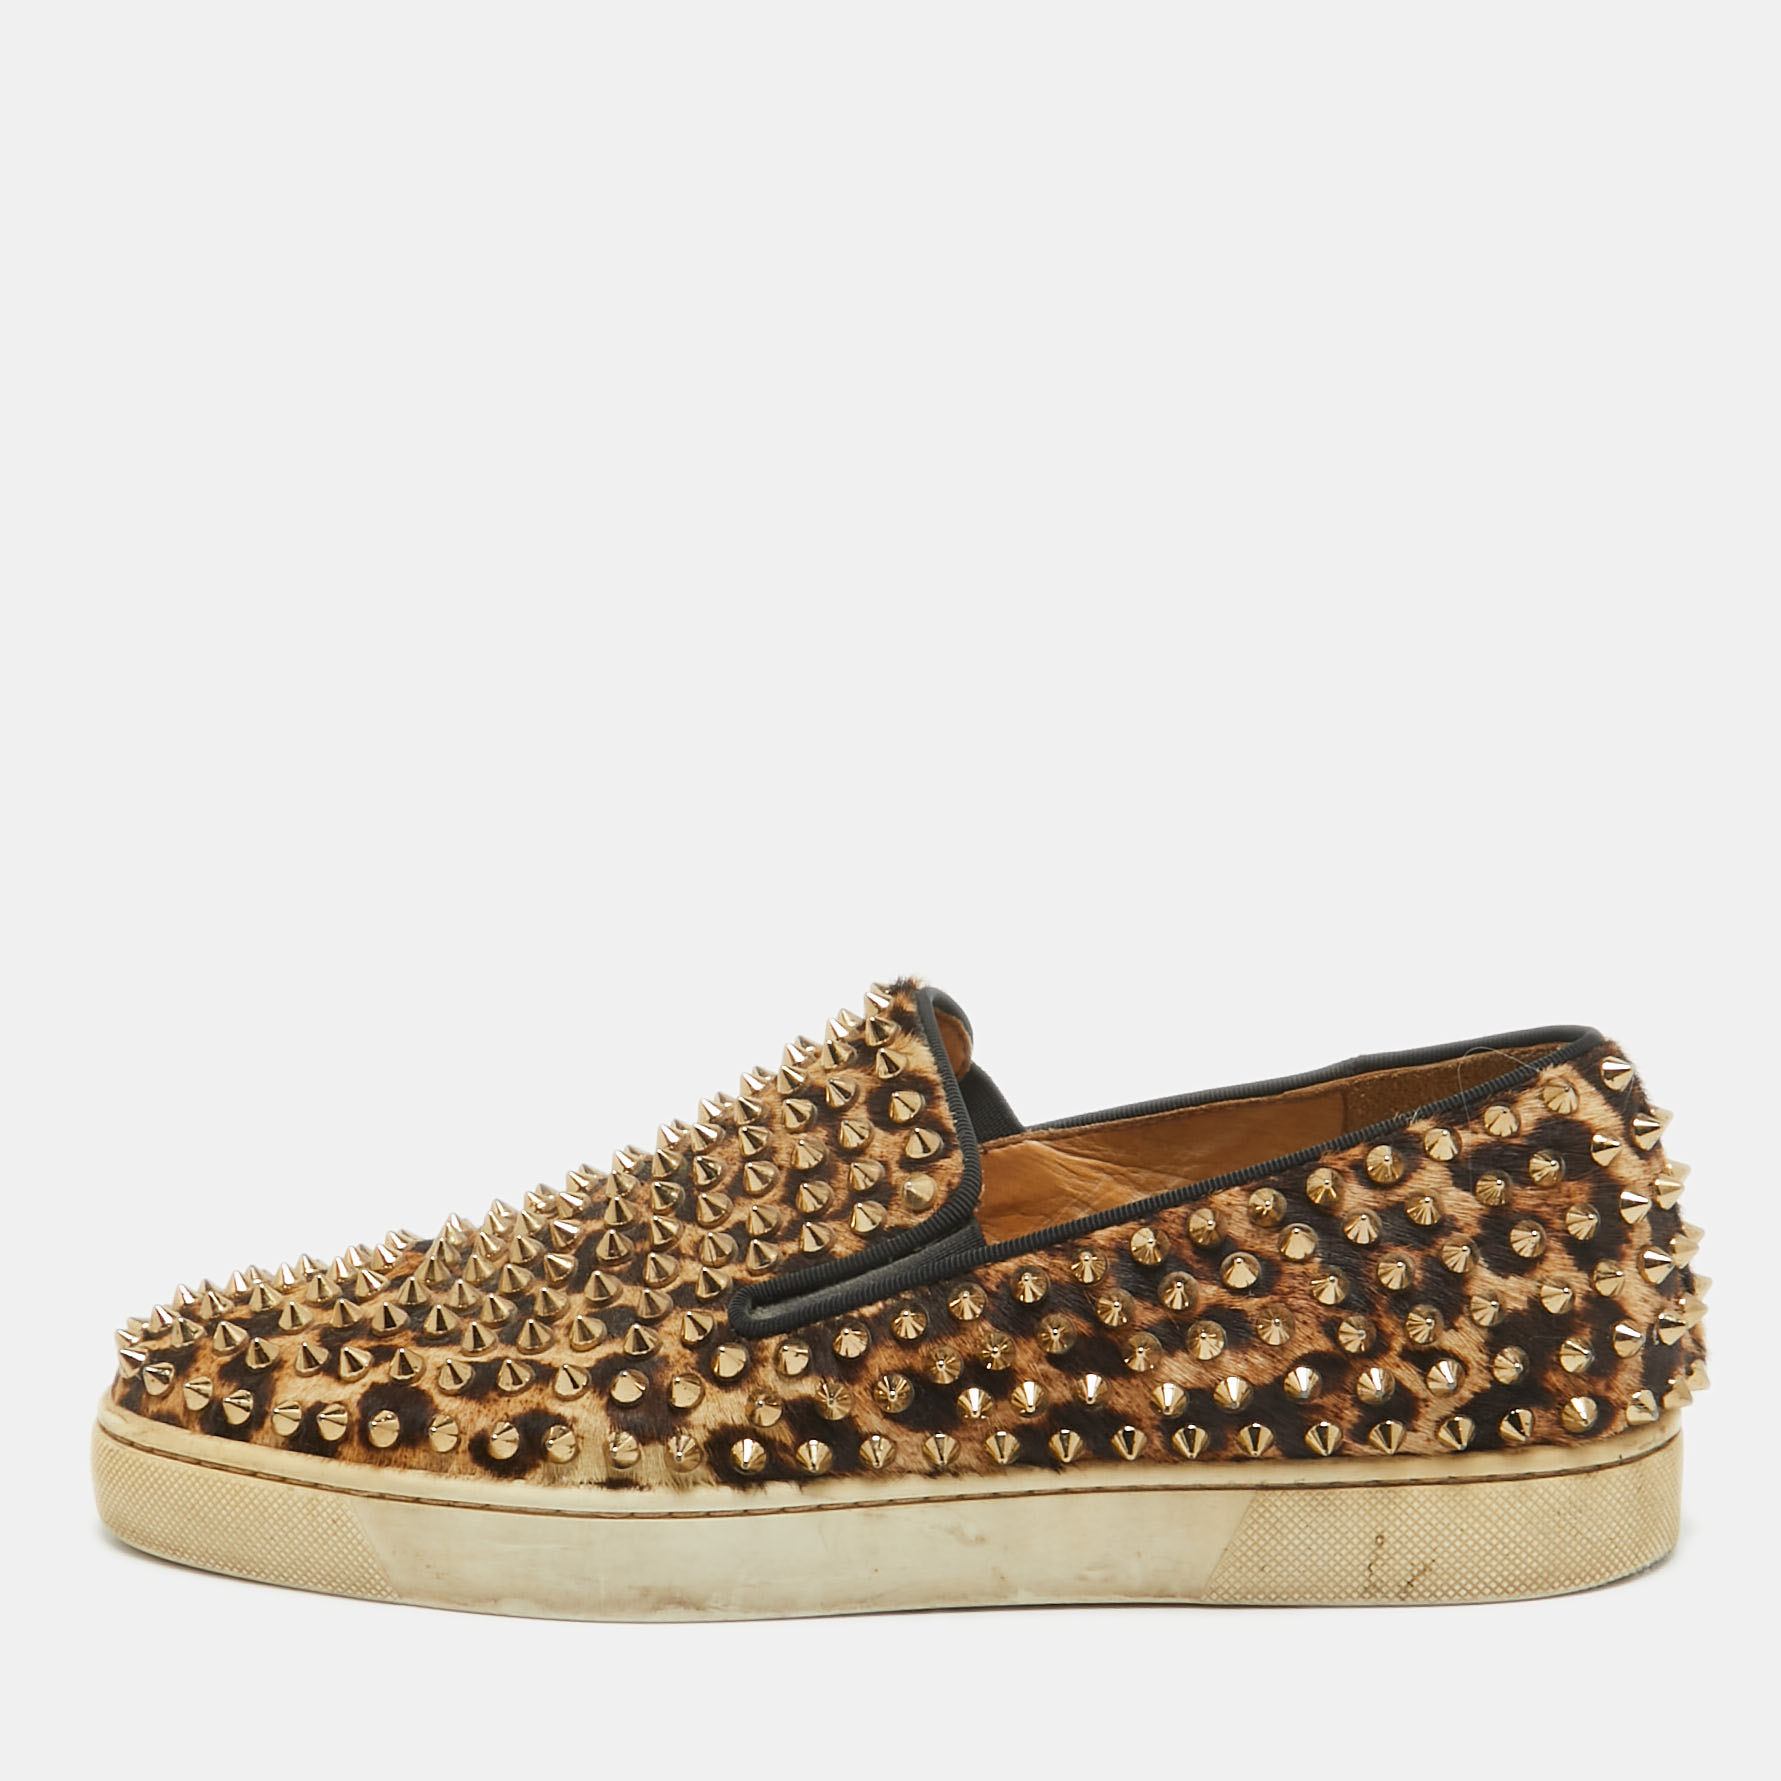 Pre-owned Christian Louboutin Beige/brown Leopard Print Calf Hair Spike Pik Boat Sneakers Size 40.5